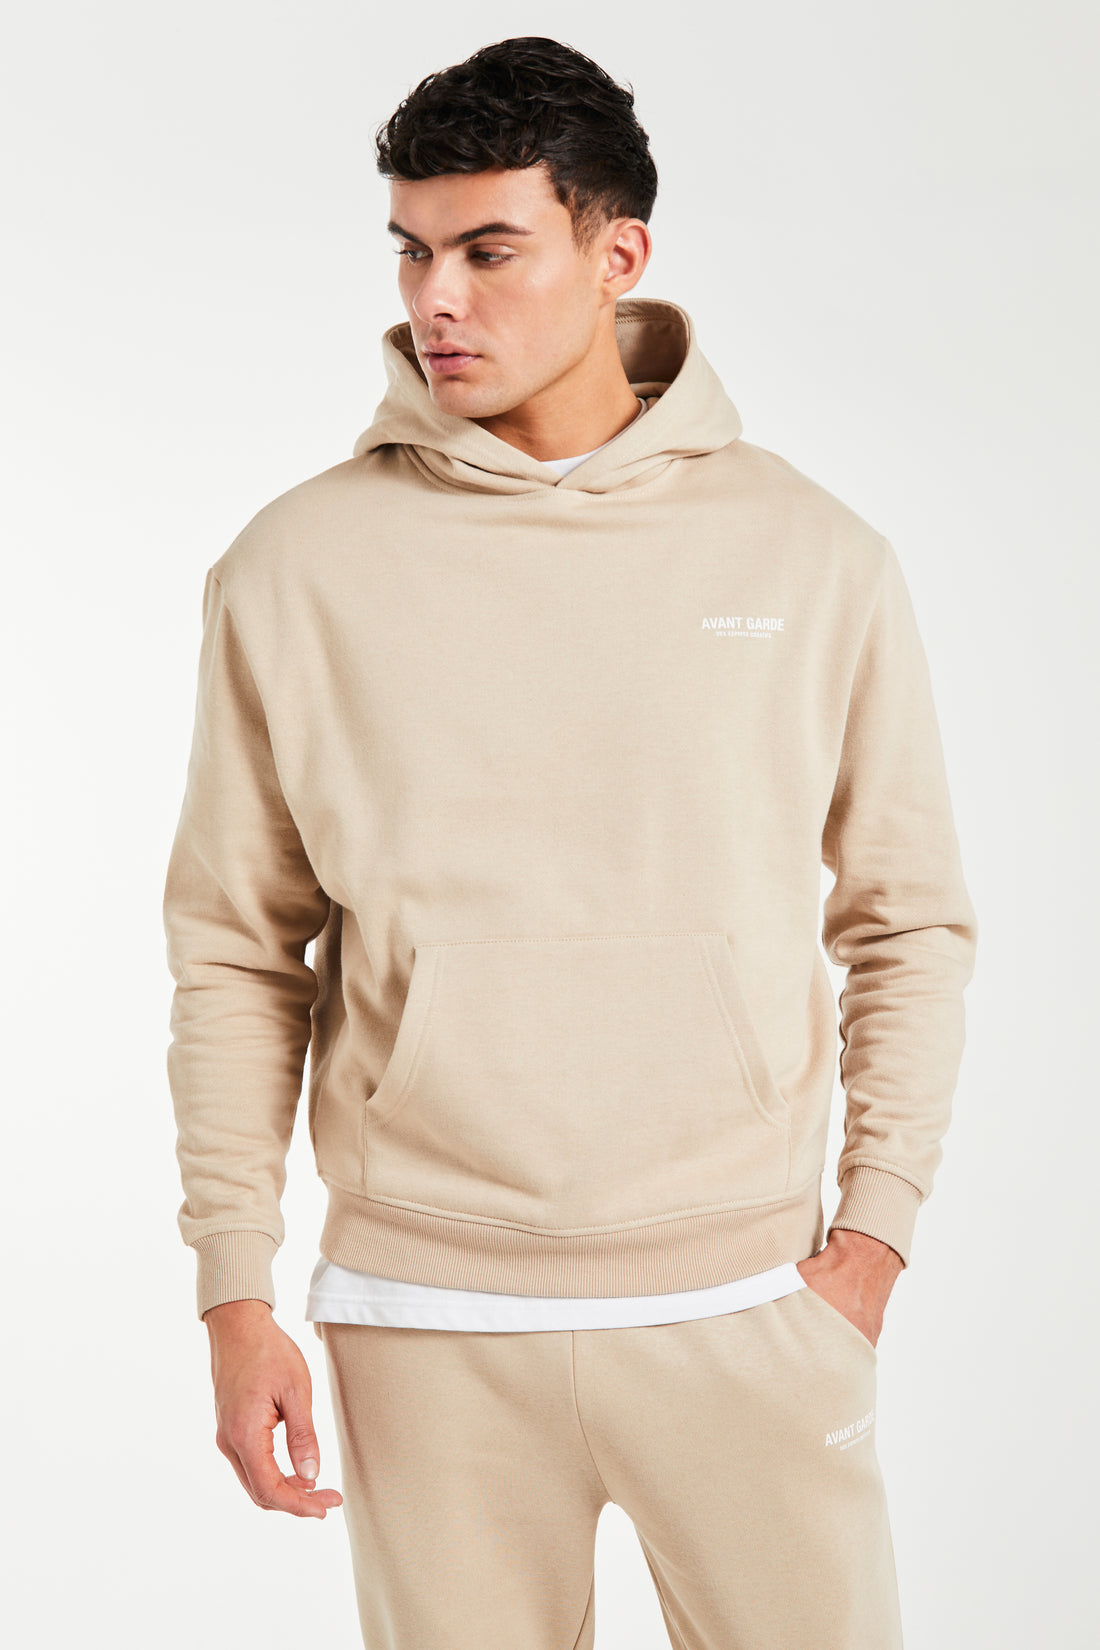 Creatives Tracksuit in Taupe